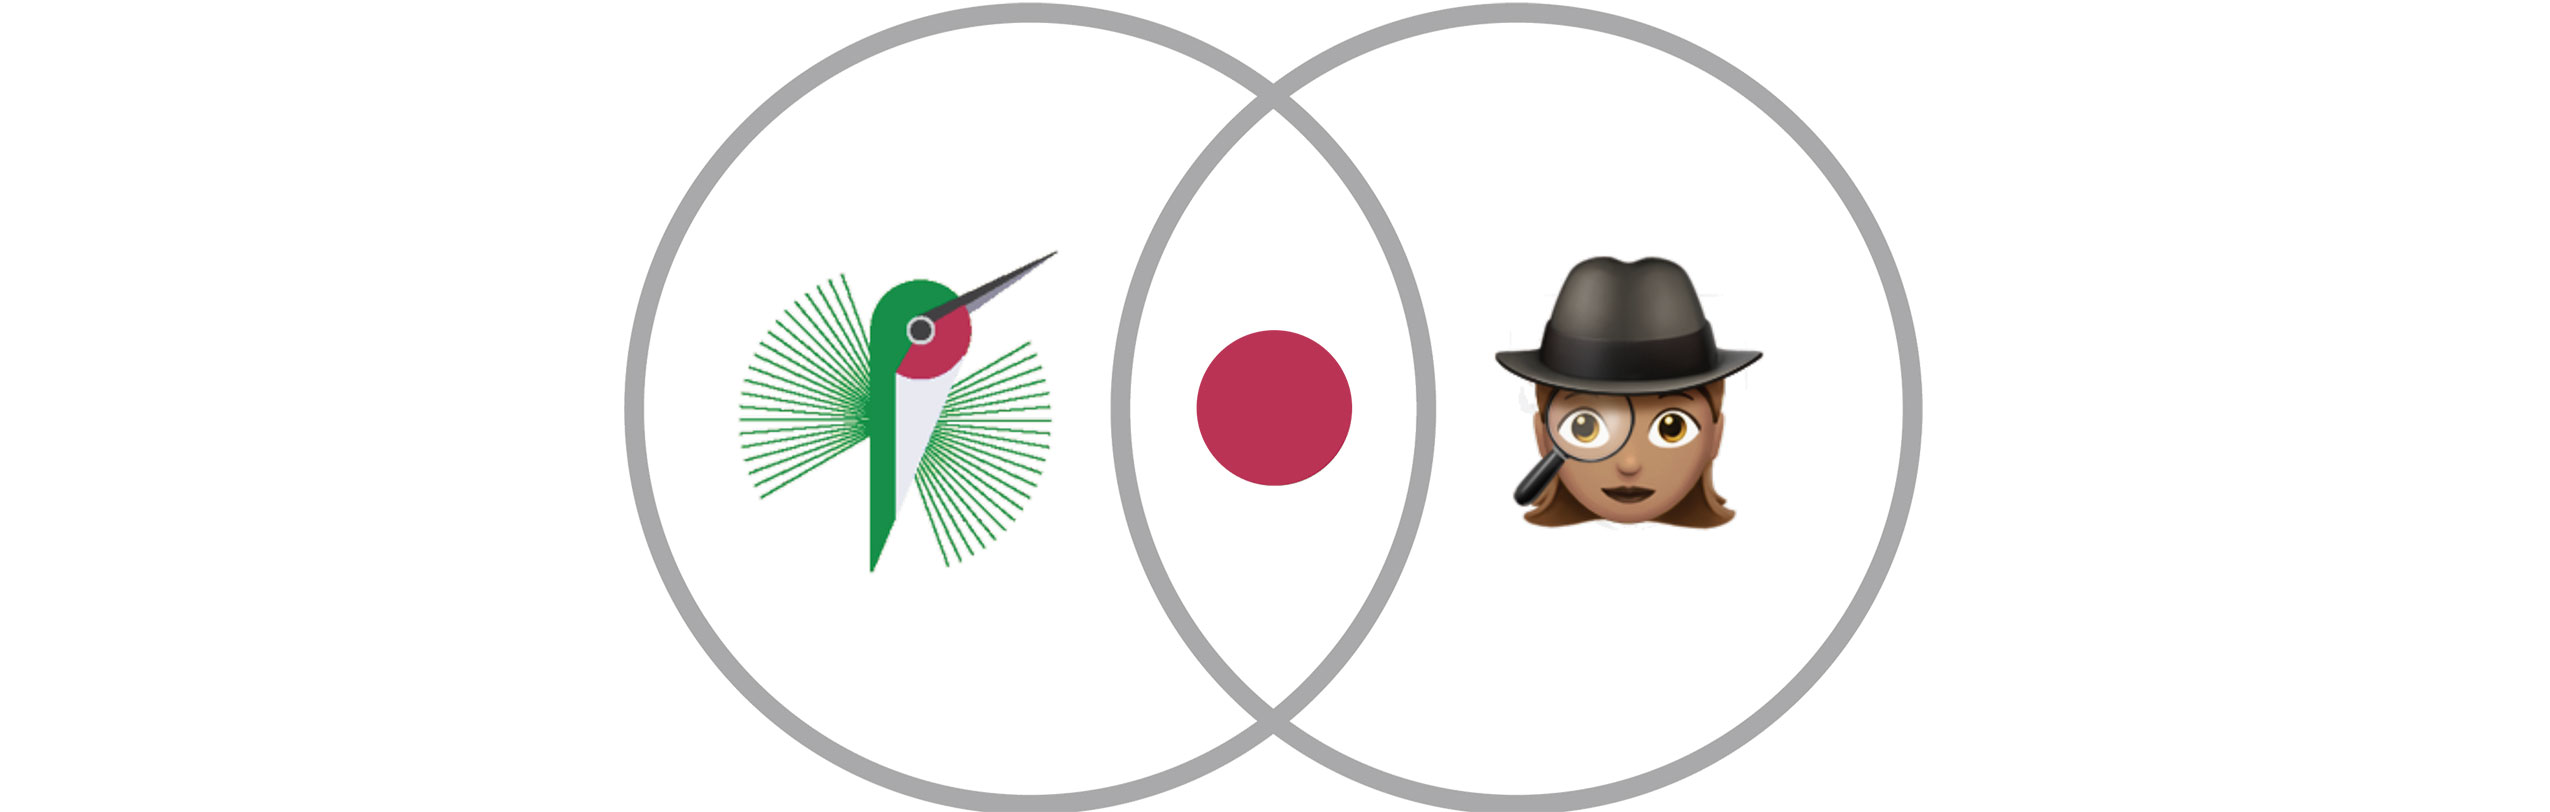 Venn diagram conveying the idea that data points in my visualization exist solely at the intersection of a bird and a bird spotter.